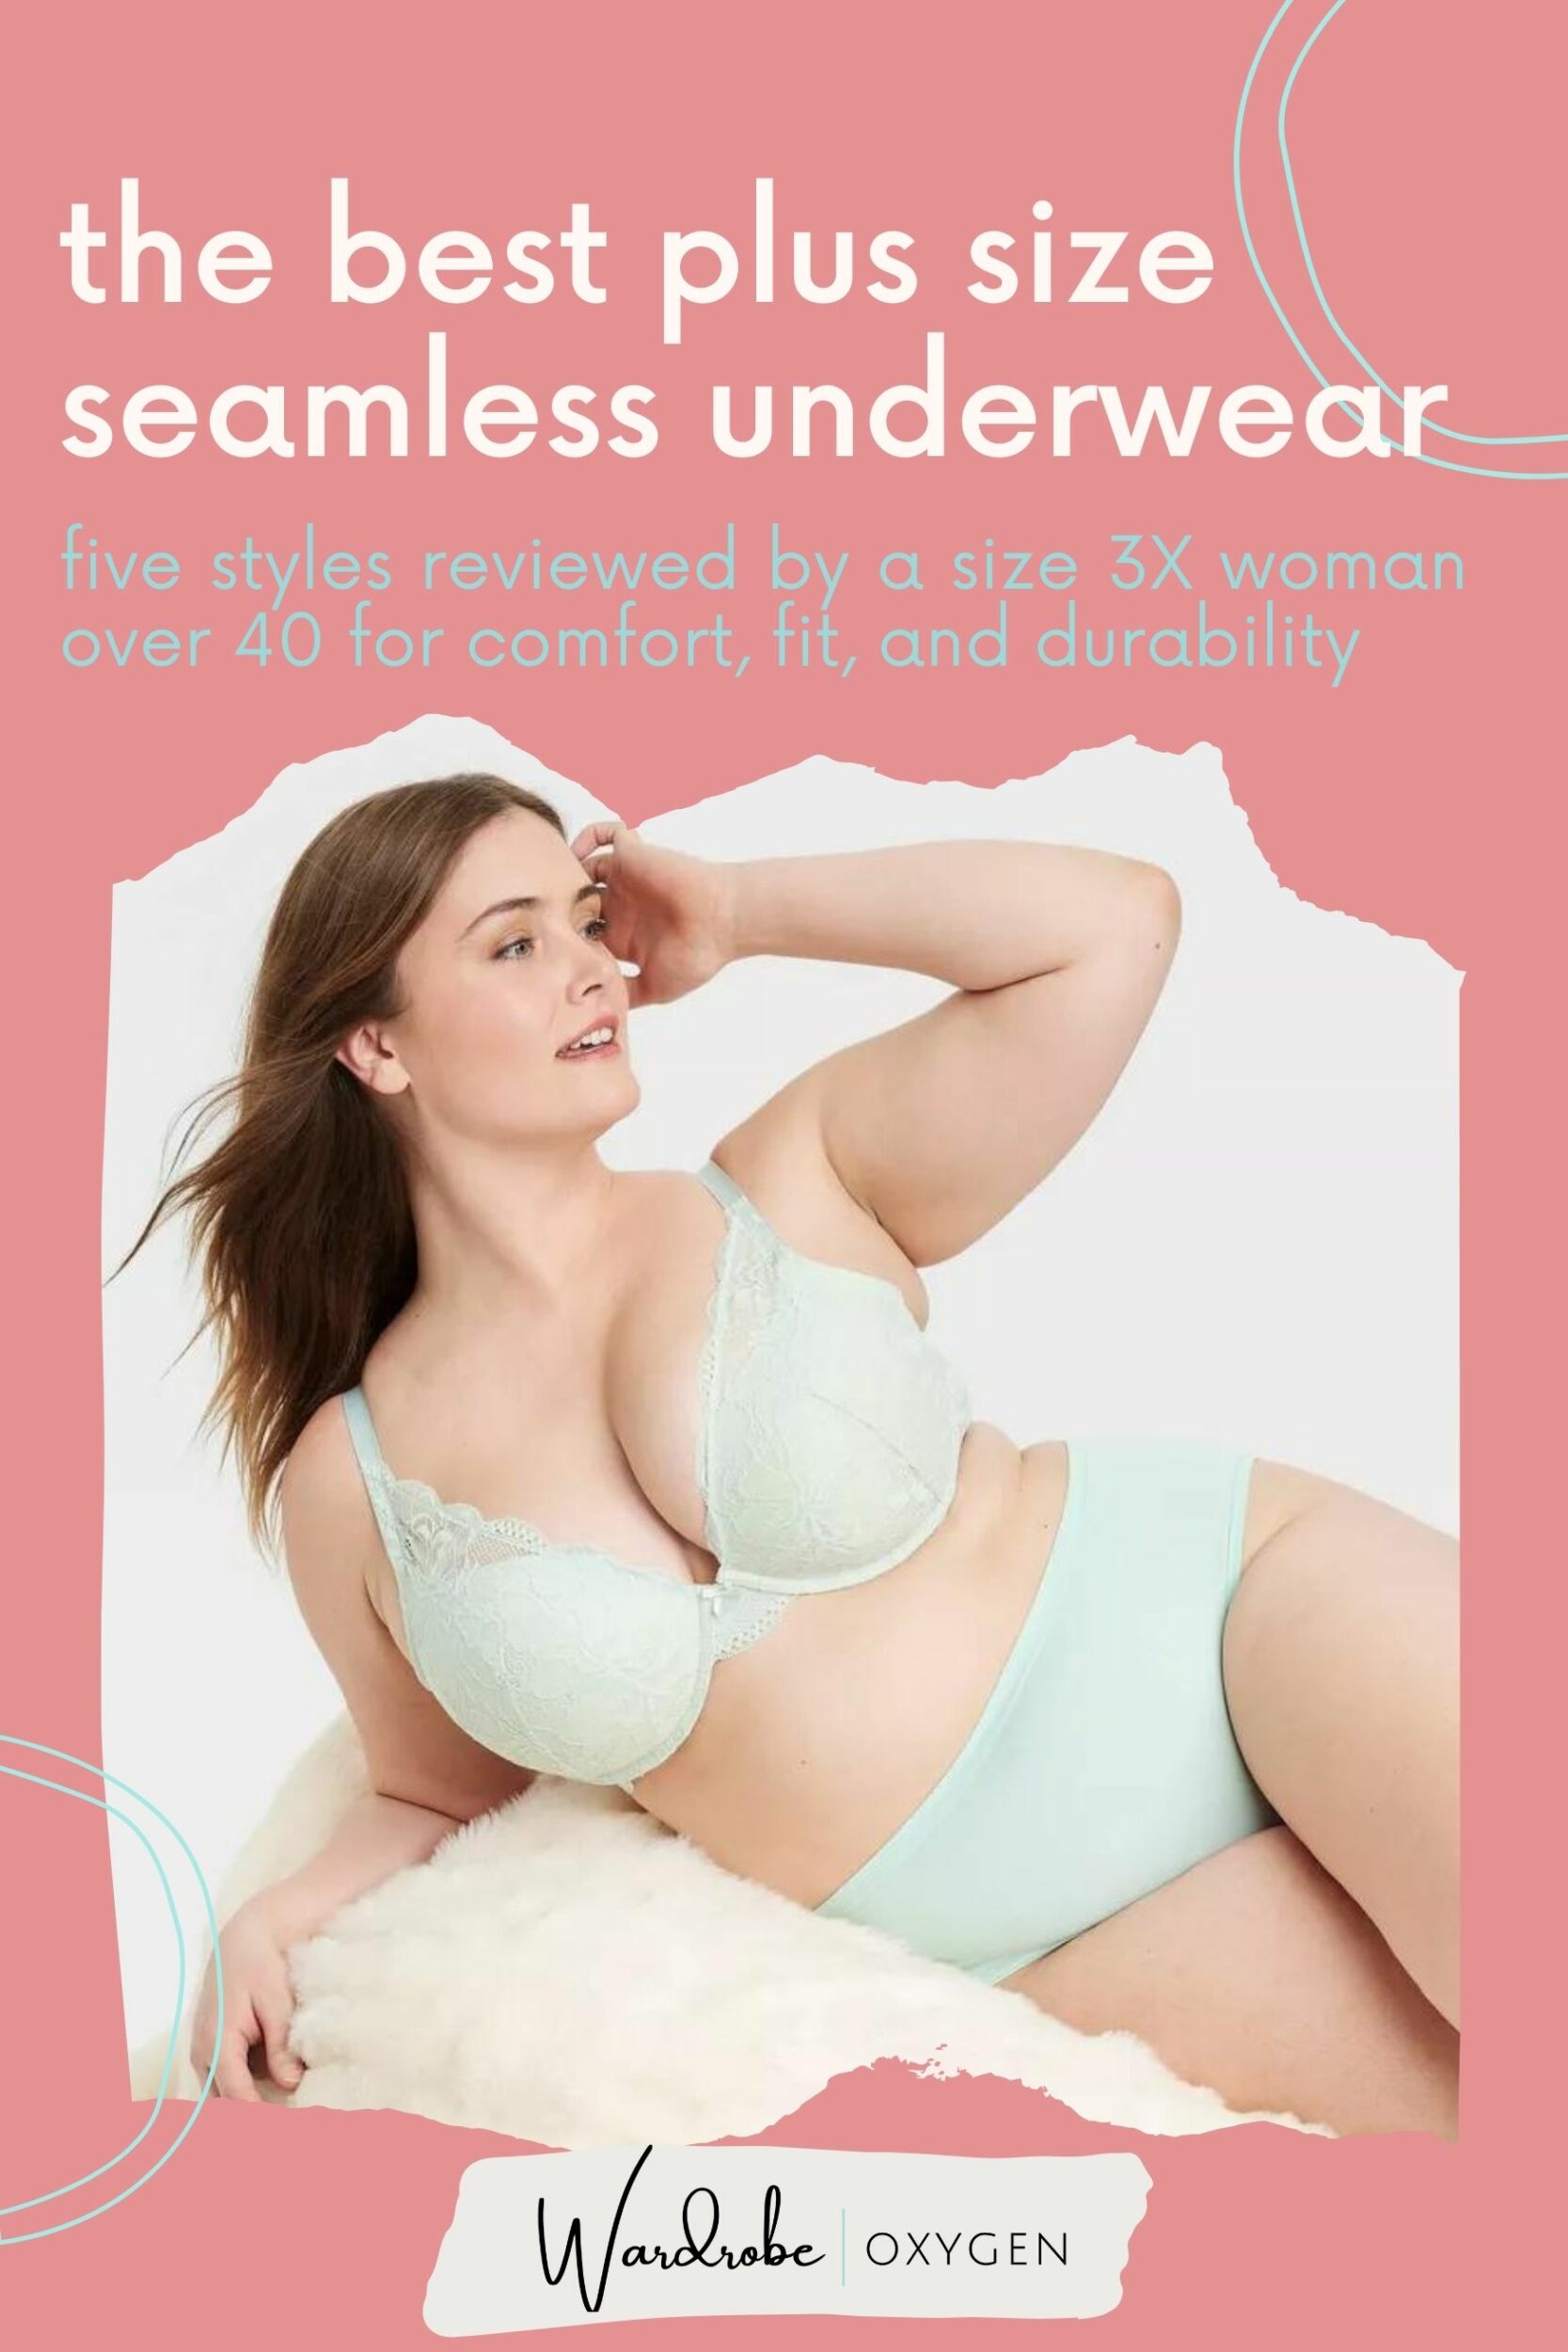 The Best Plus Size Seamless Underwear: Review by a Size 3X